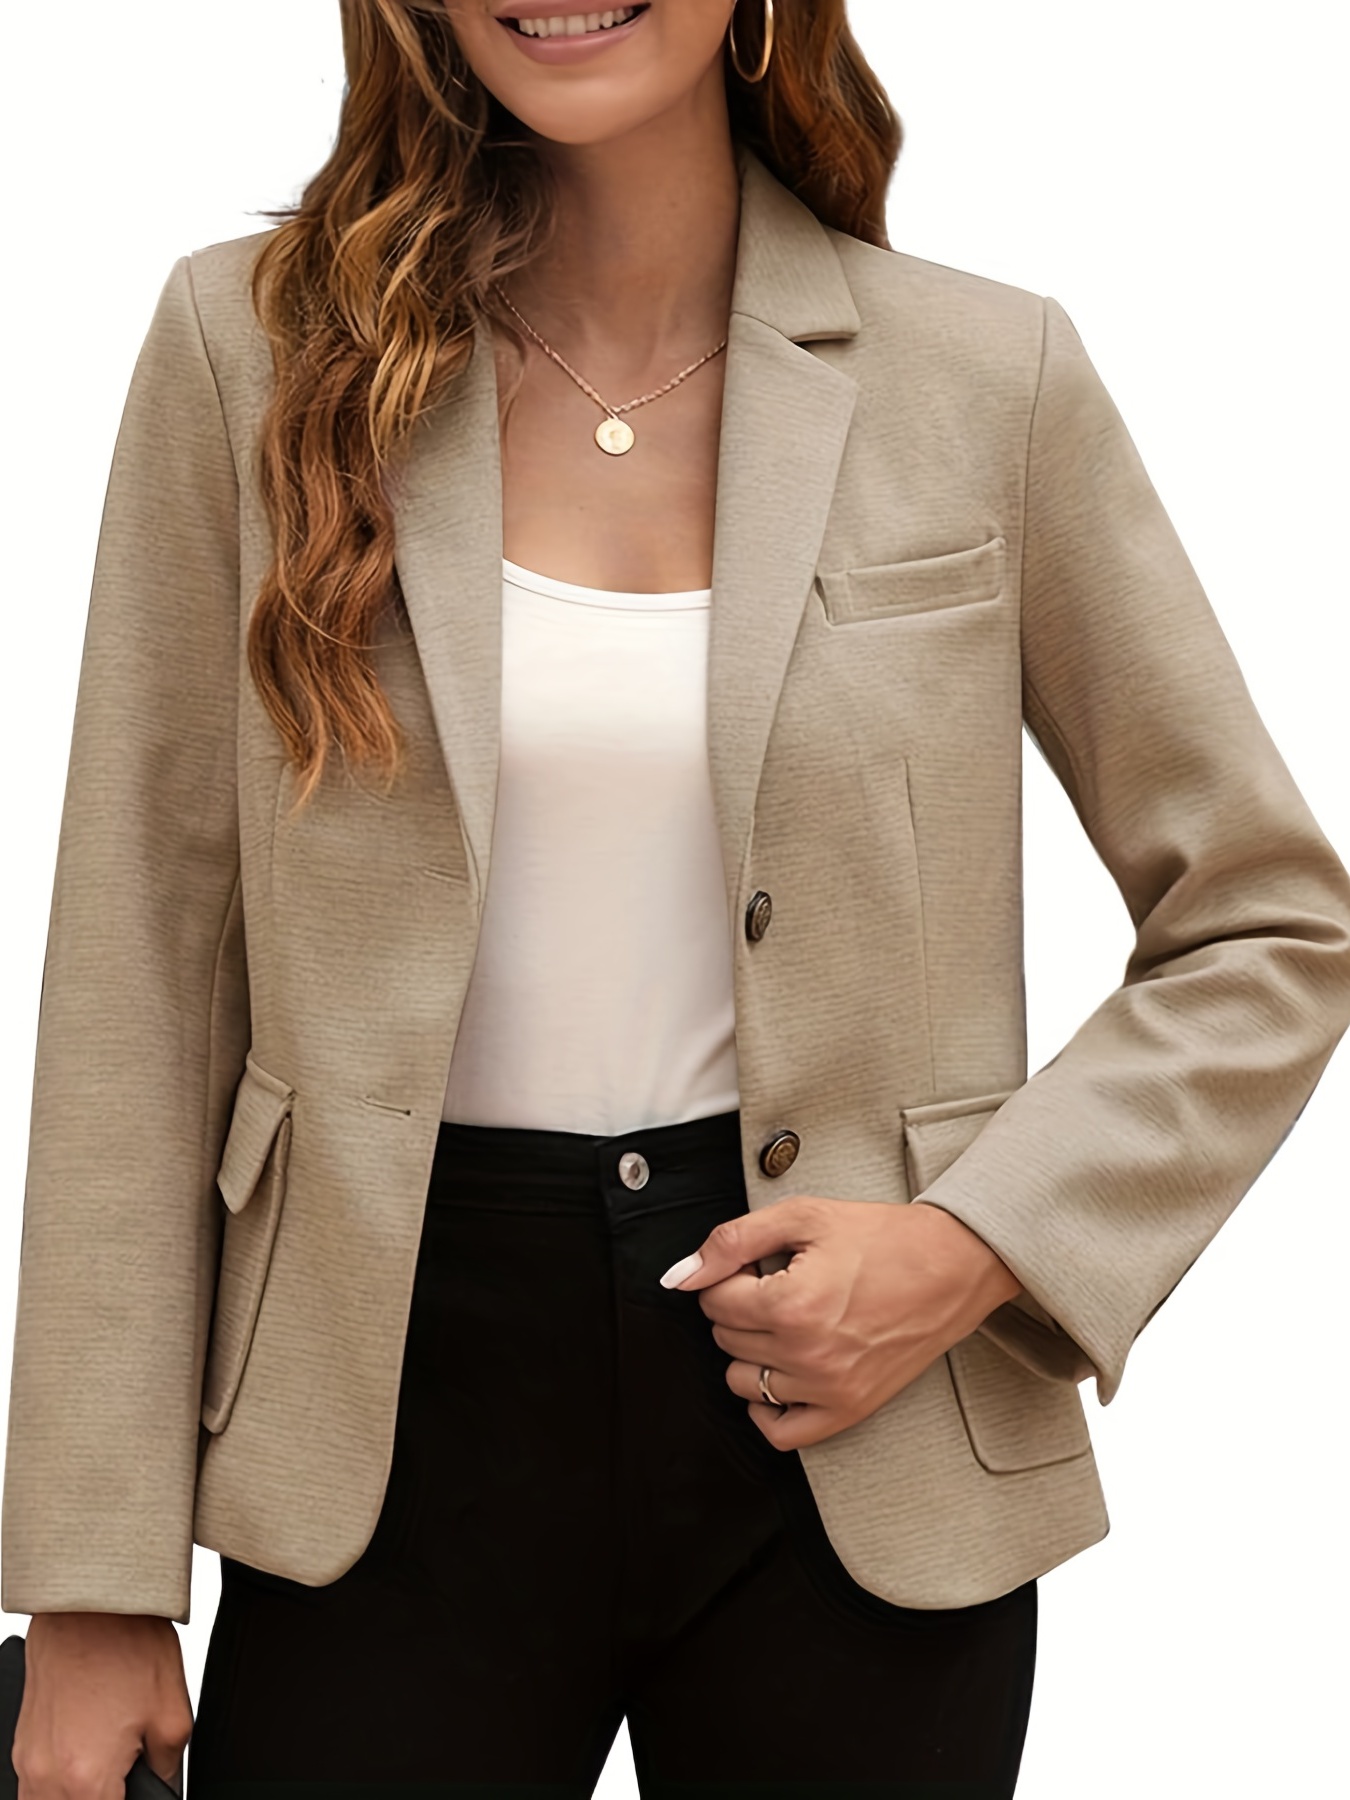 Korean Style Business Blazer With Pants Slim Office Suit For Women Outfits  Work